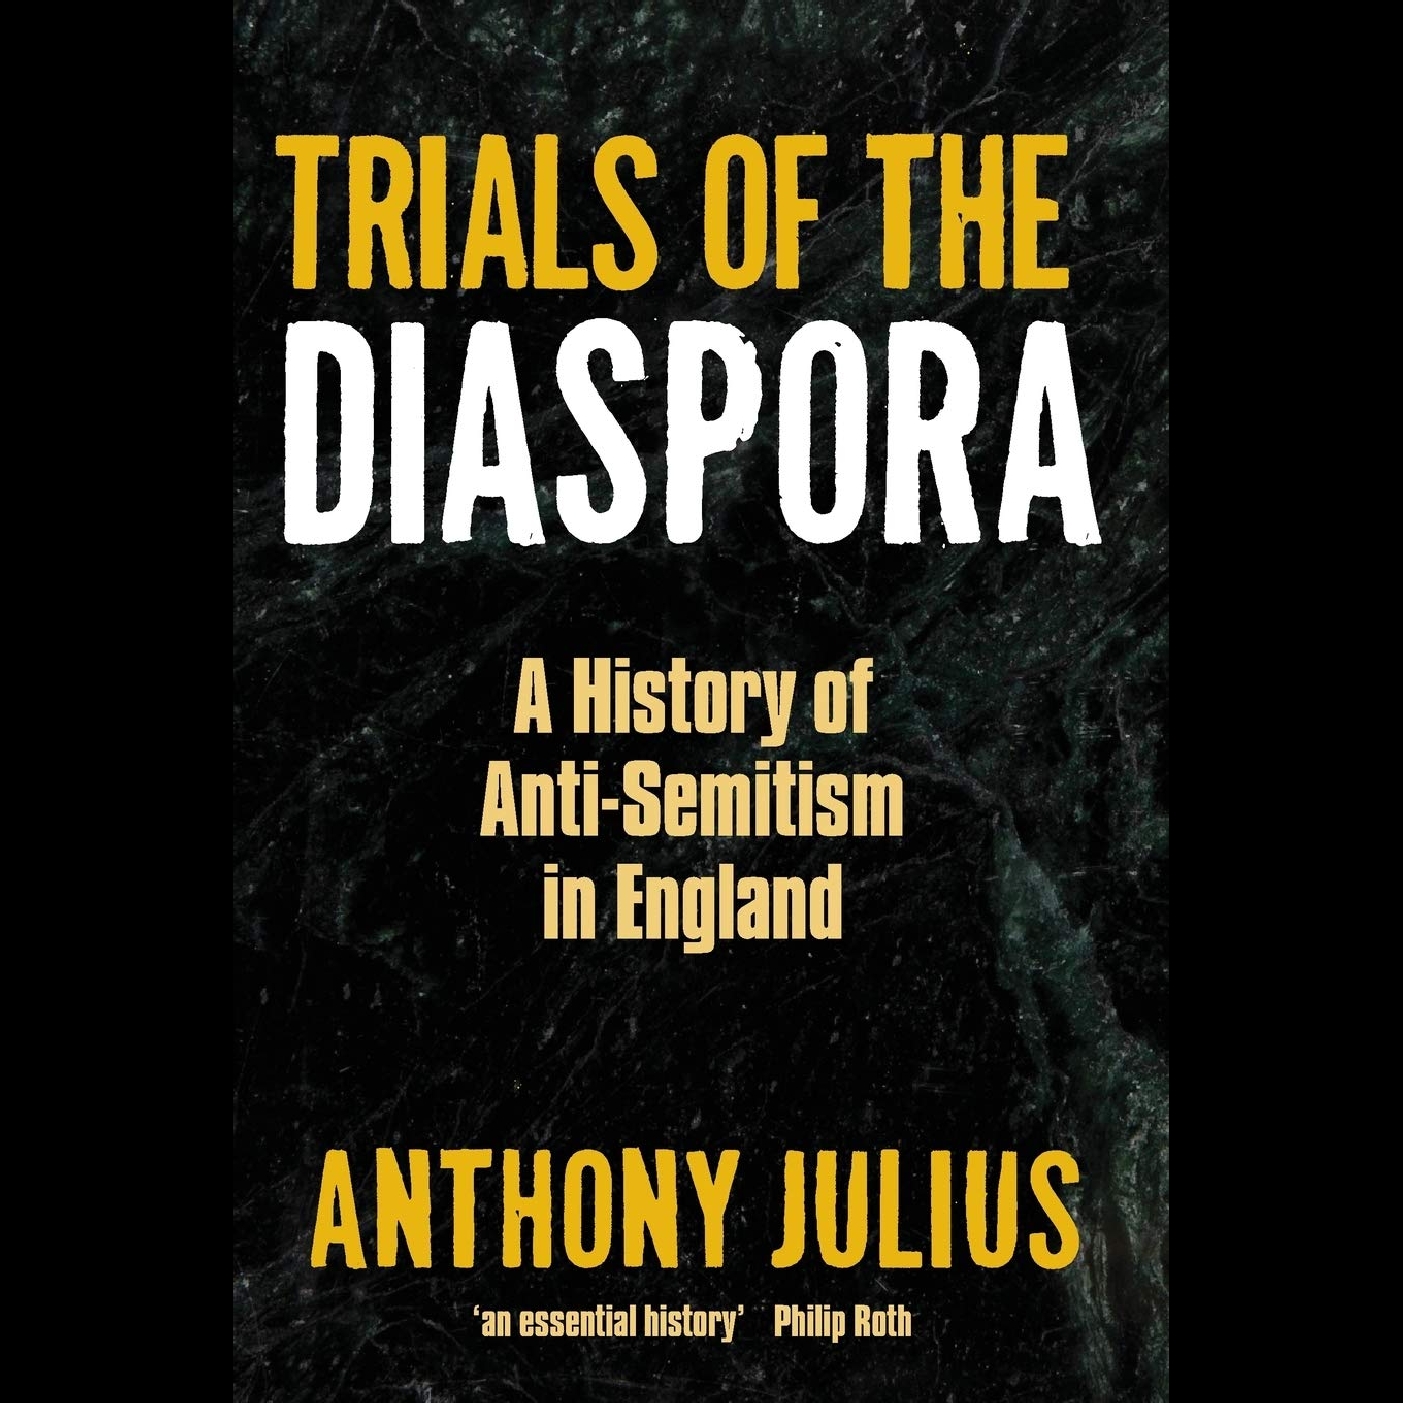 Trials of the Diaspora, A History of Anti-Semitism in England #1 - Anthony Julius